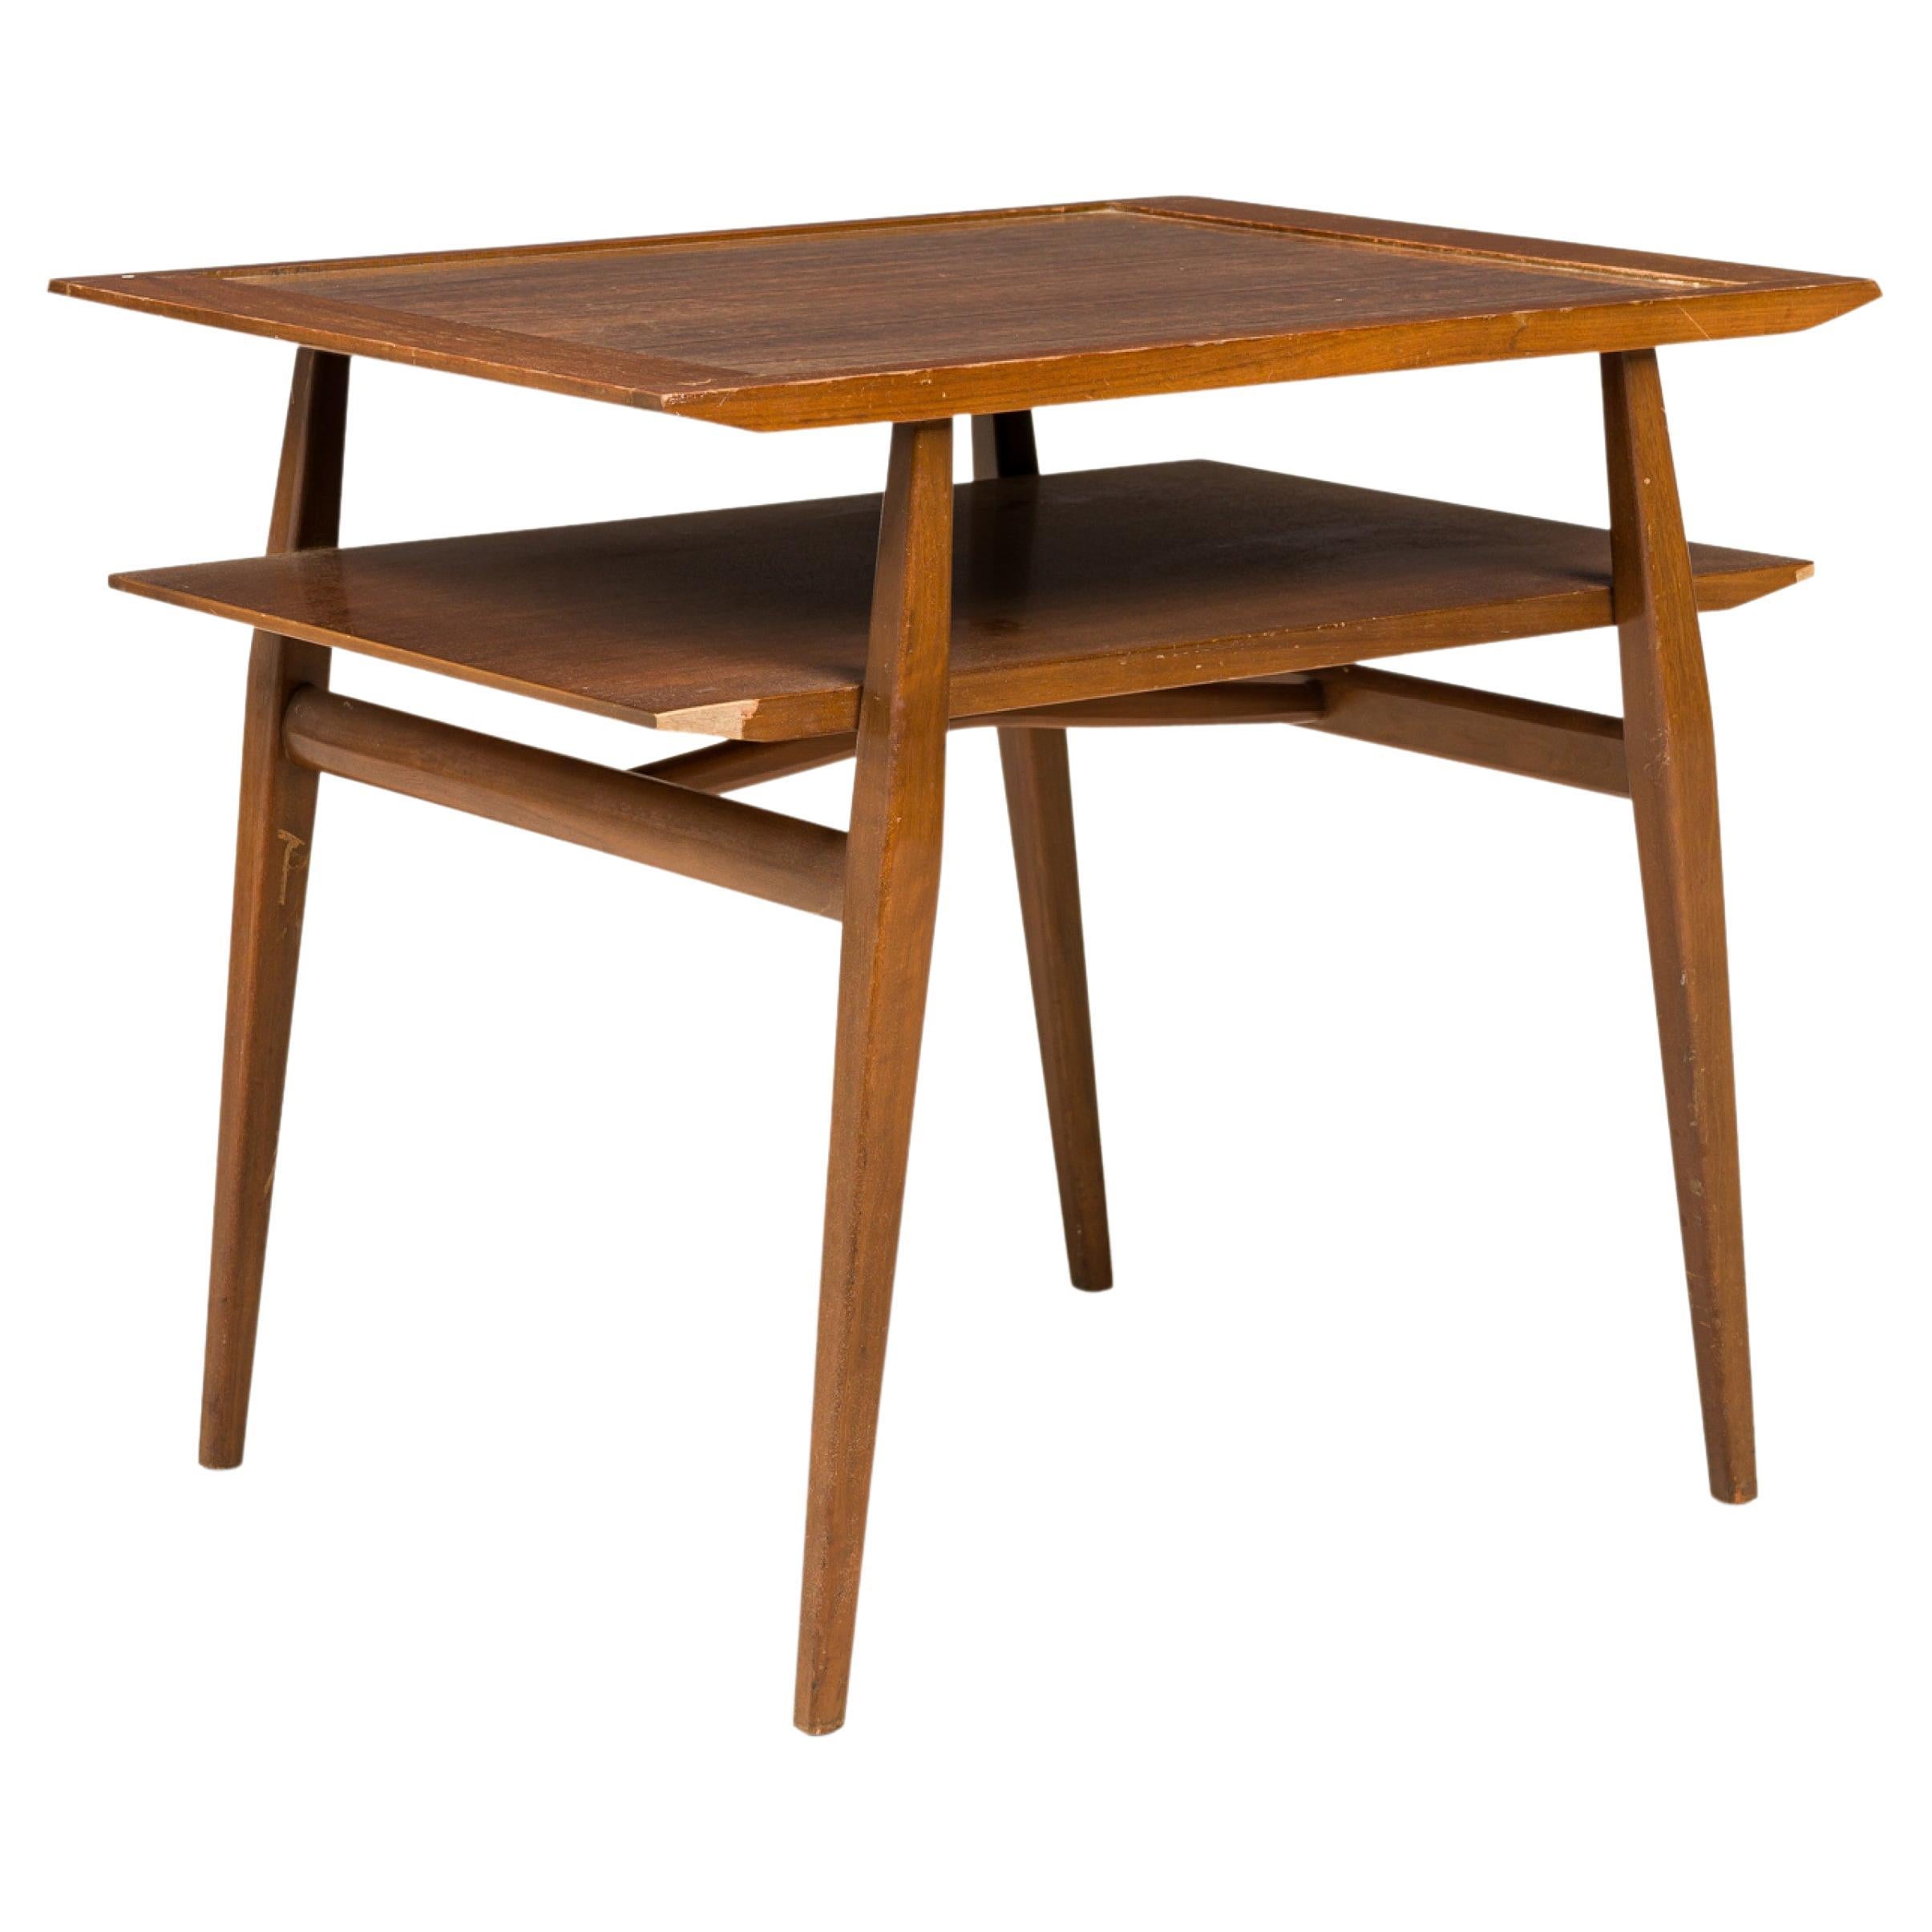 Bertha Schaefer for Singer & Sons Two-Tier Walnut and Laminate End / Side Table